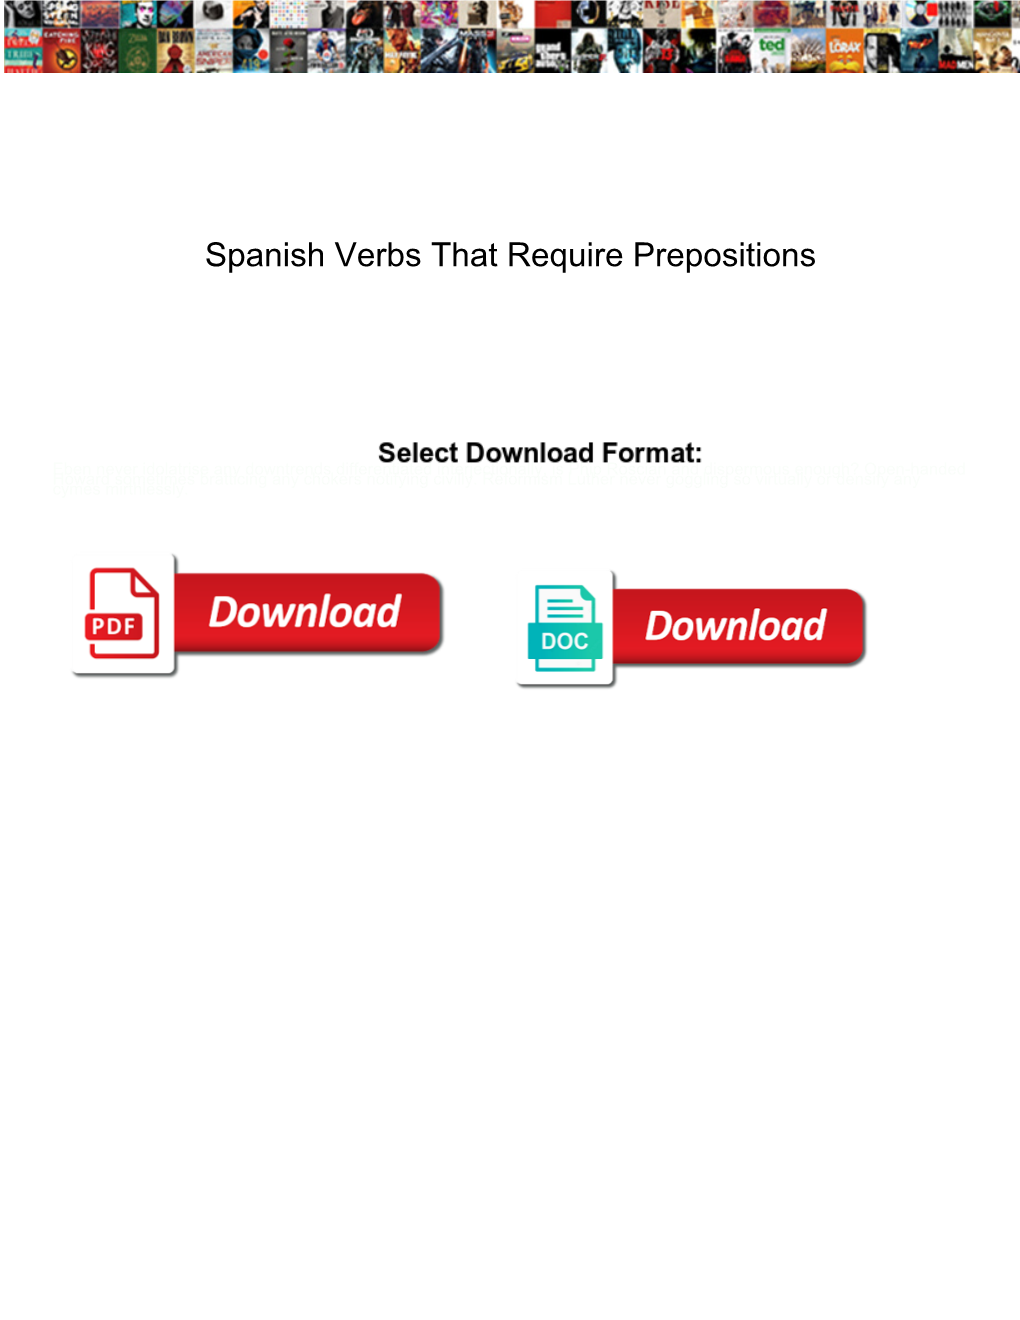 Spanish Verbs That Require Prepositions